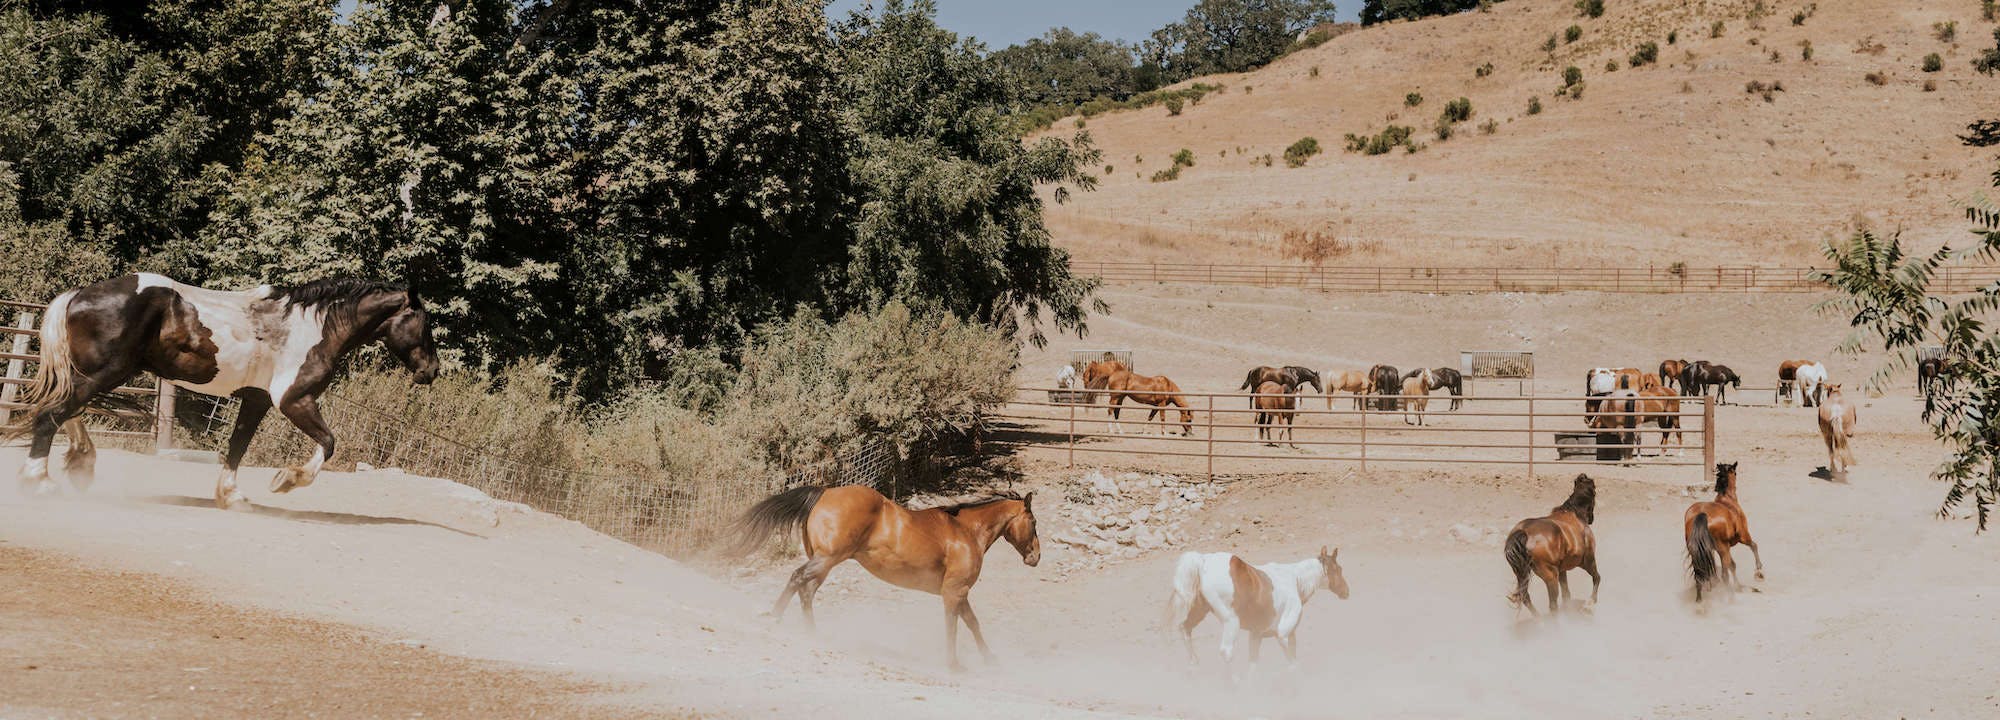 horses running on the dirt path